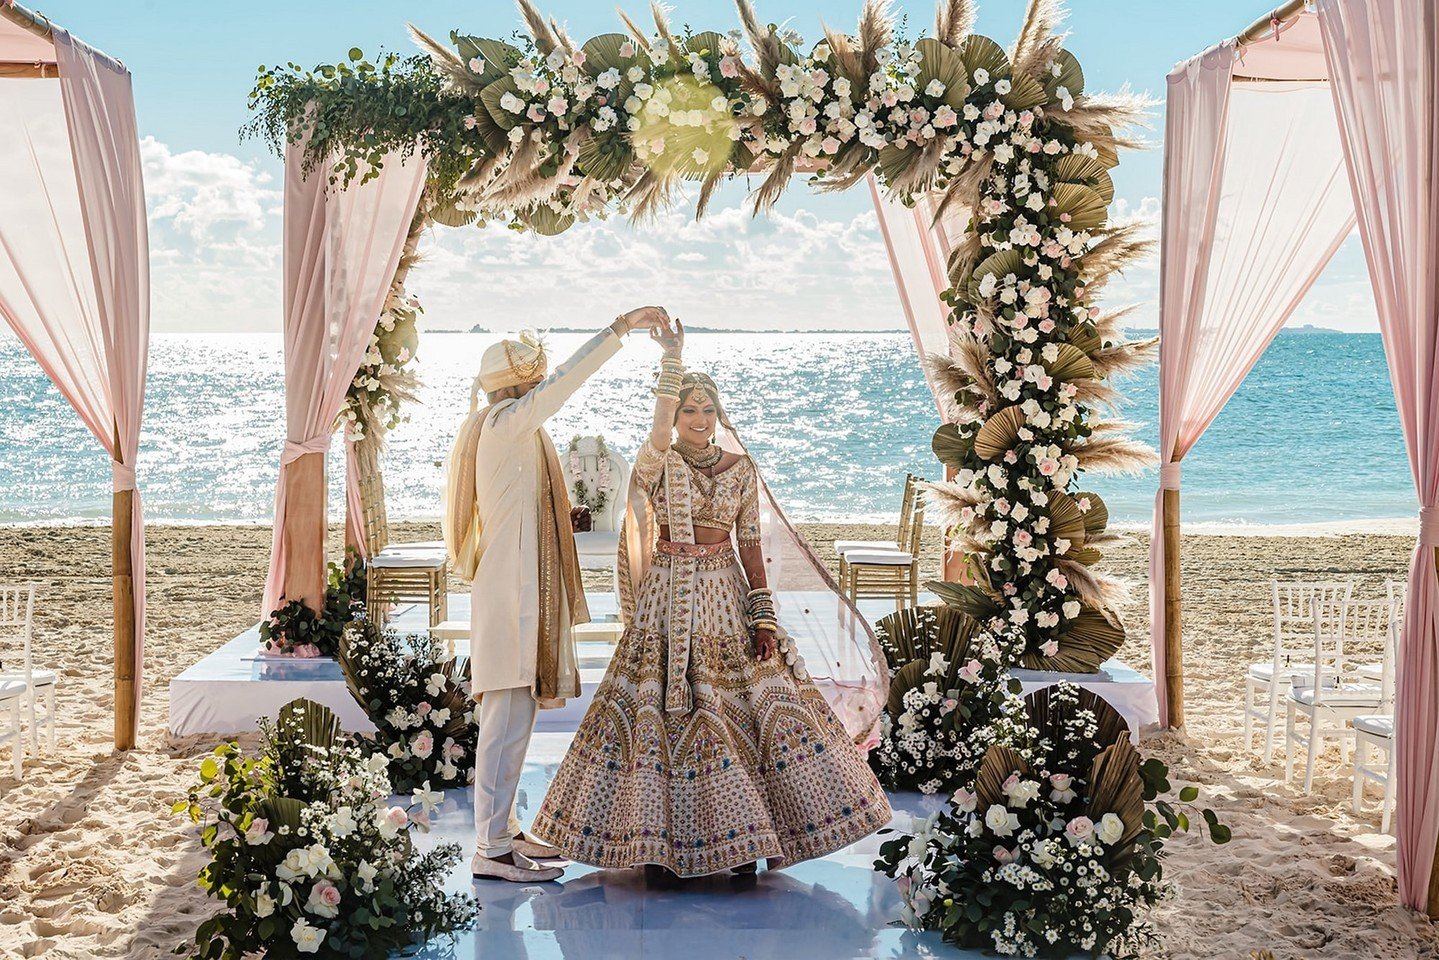 POV: it's your wedding day, it's a beautiful sunny day with nothing but blue skies and you're twirling under your gorgeous floral adorned mandap with your forever love. Life doesn't get much better #PartnersinParadise⁠
🇲🇽 @shaadidestinations⁠
🧑&zw